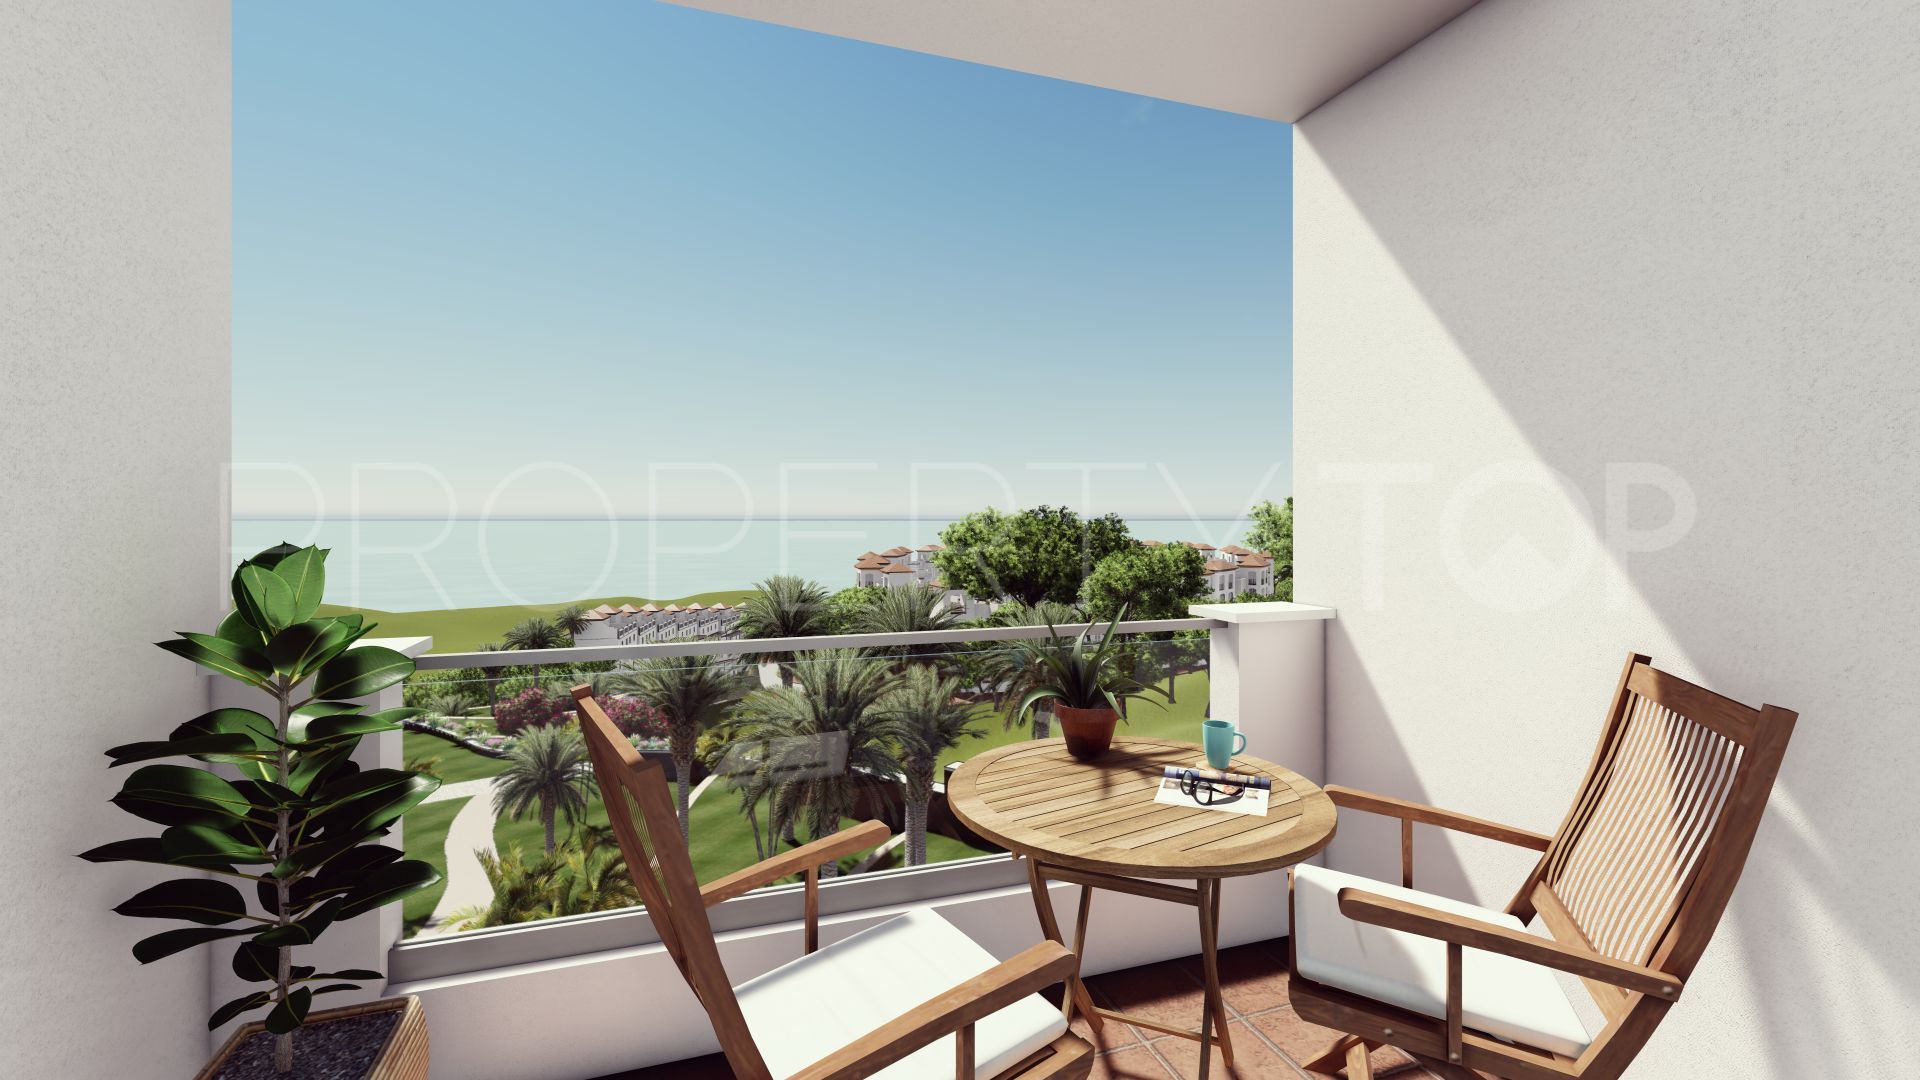 3 bedrooms Manilva apartment for sale